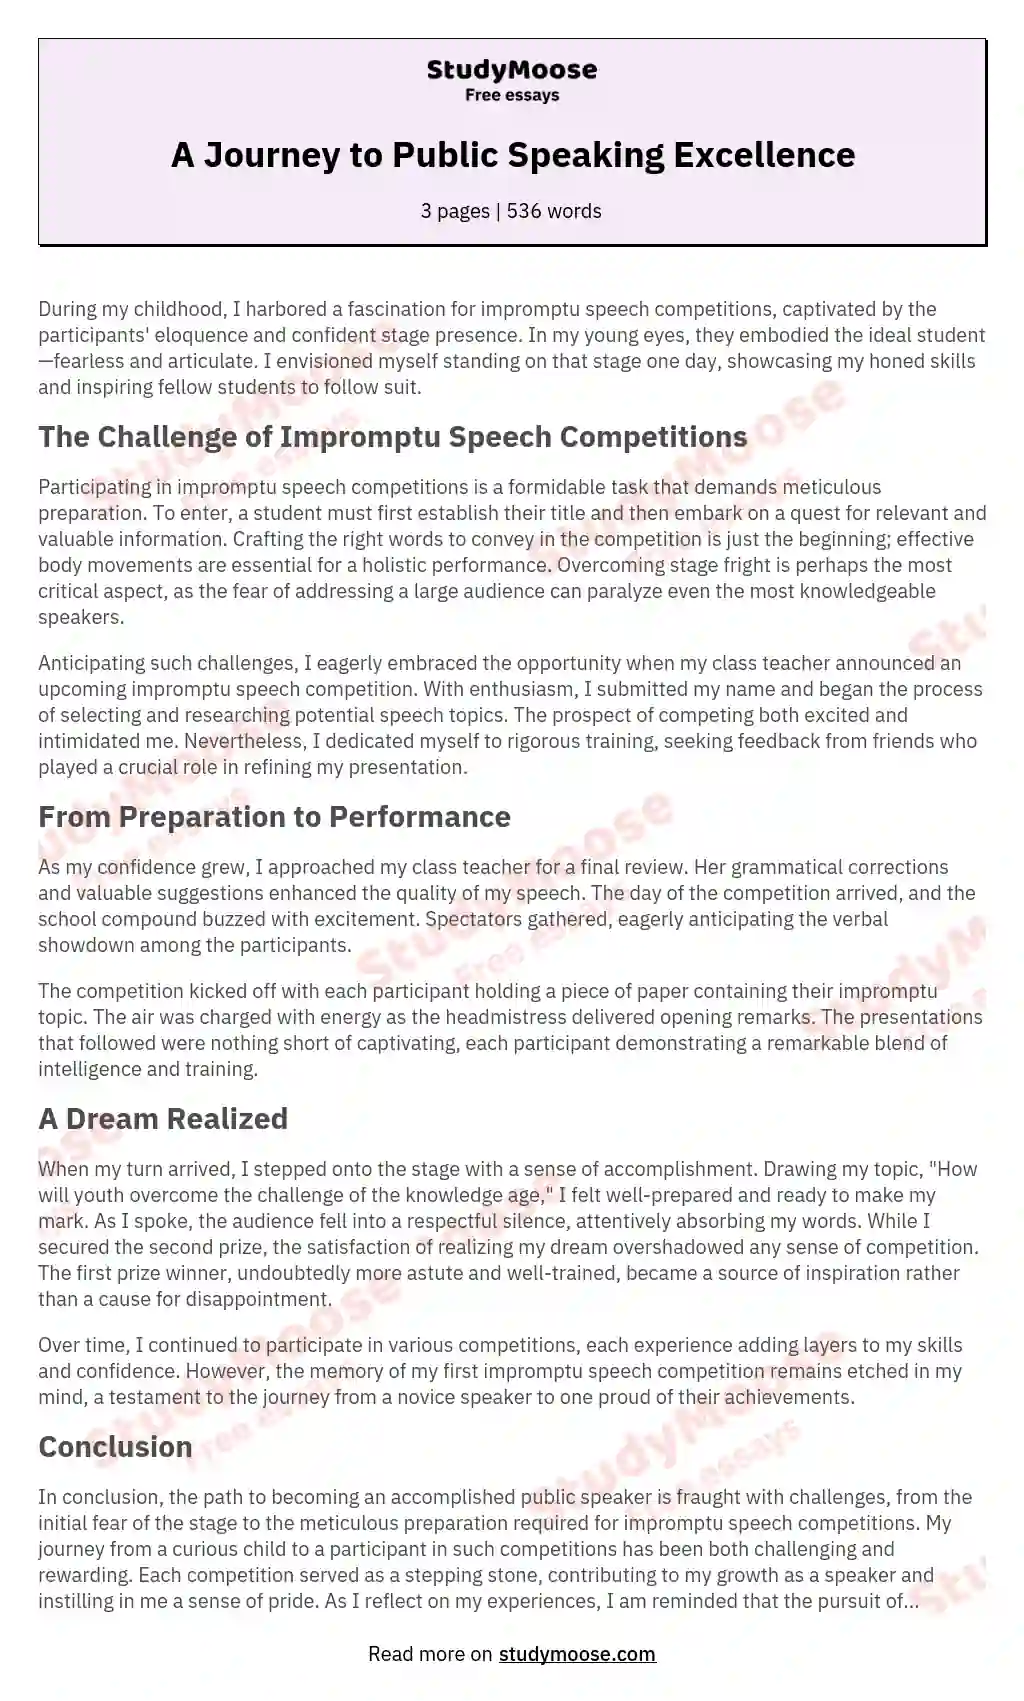 A Journey to Public Speaking Excellence essay